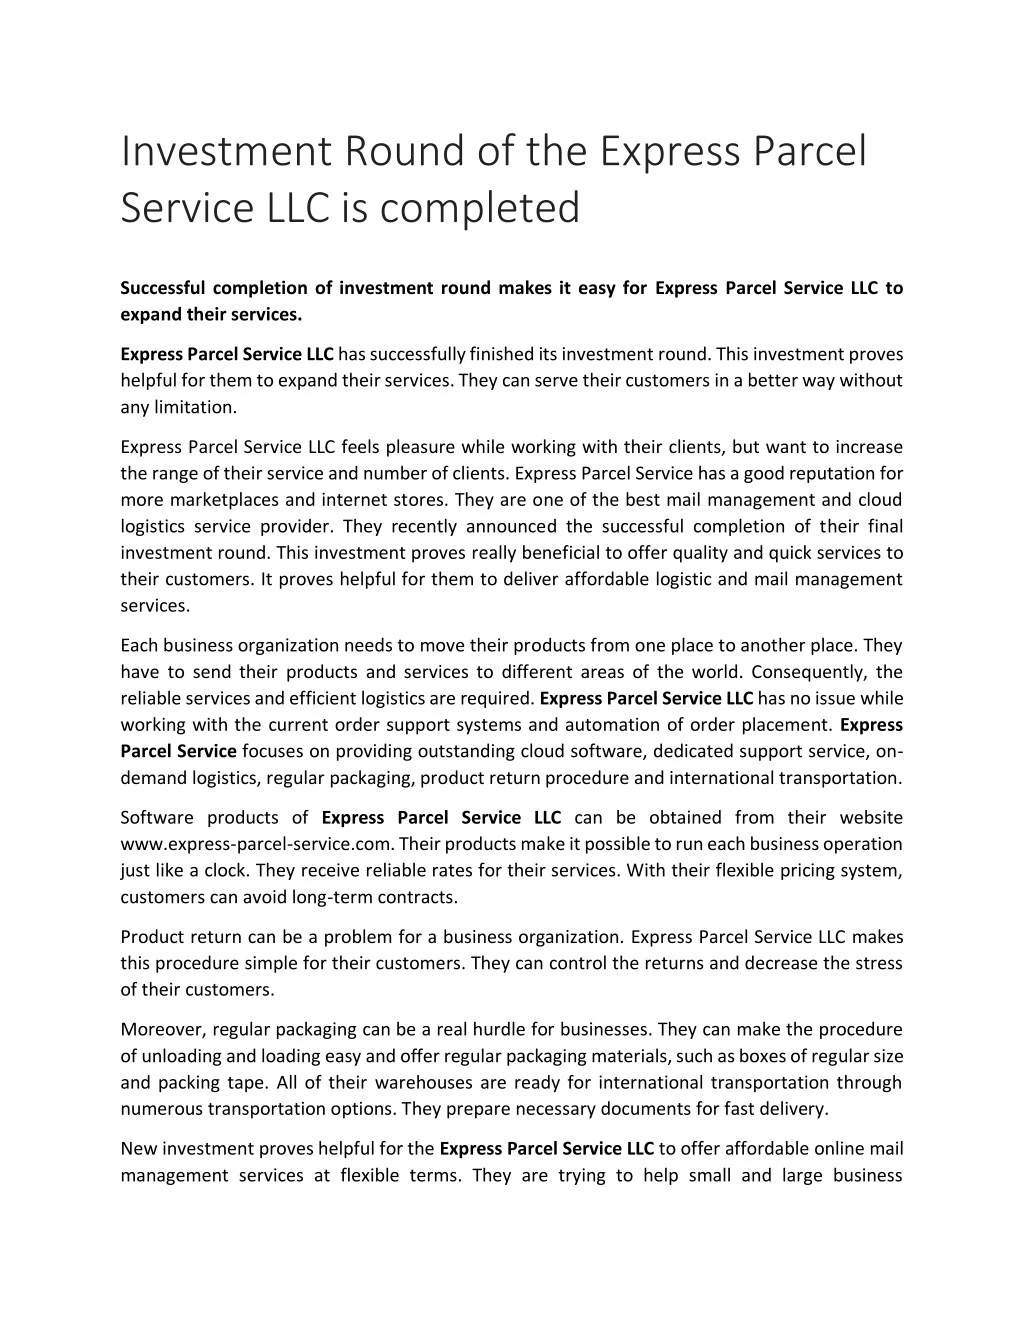 investment round of the express parcel service